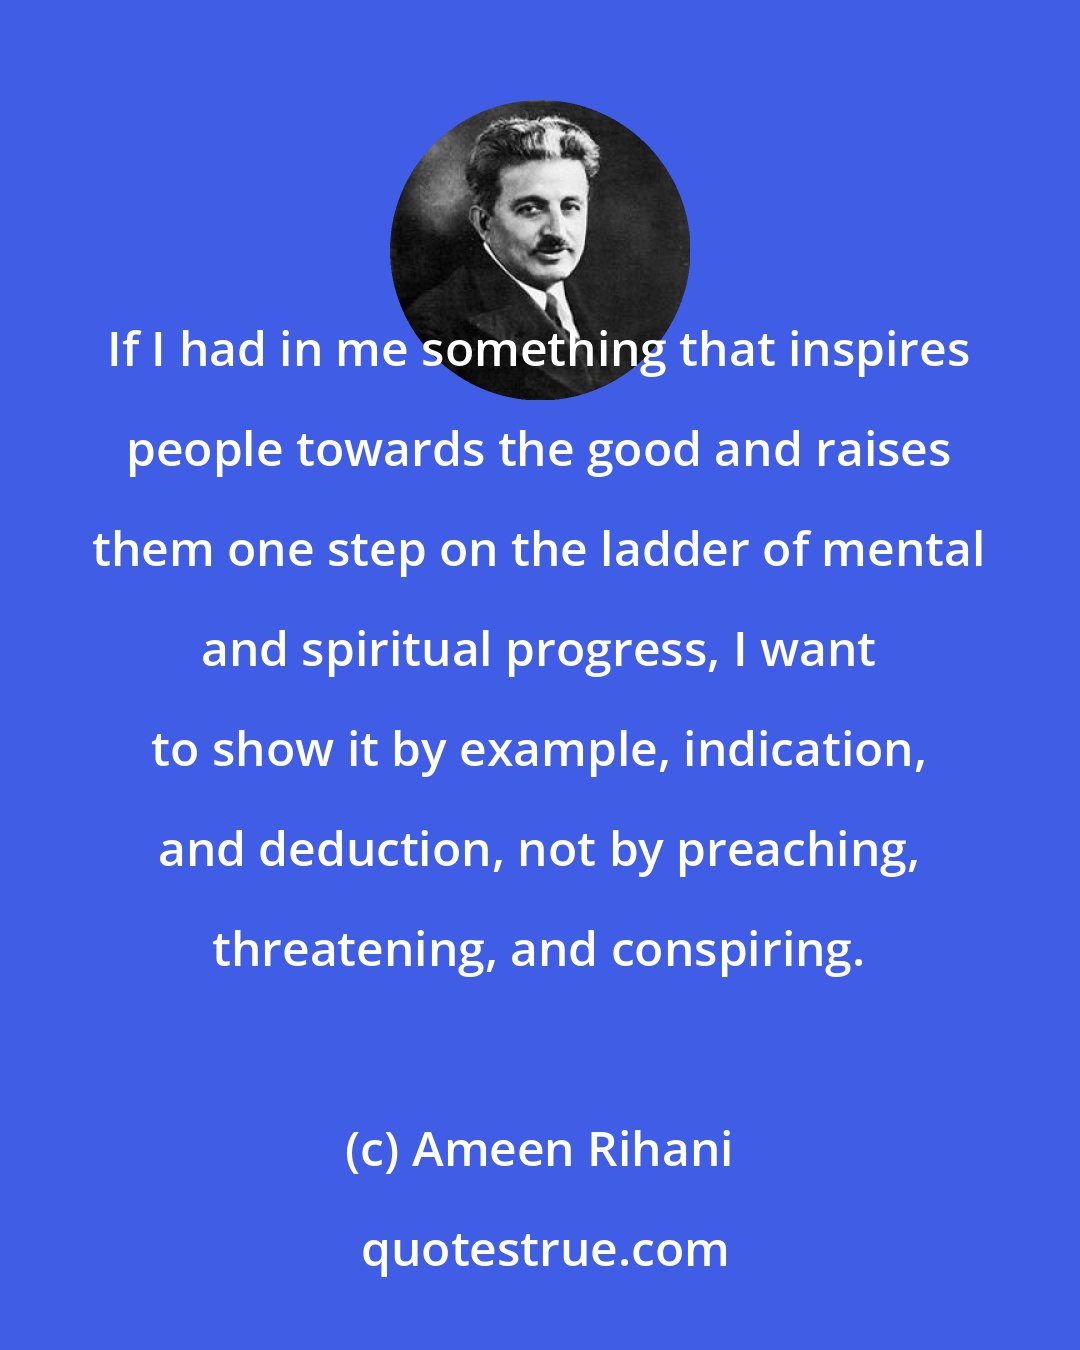 Ameen Rihani: If I had in me something that inspires people towards the good and raises them one step on the ladder of mental and spiritual progress, I want to show it by example, indication, and deduction, not by preaching, threatening, and conspiring.